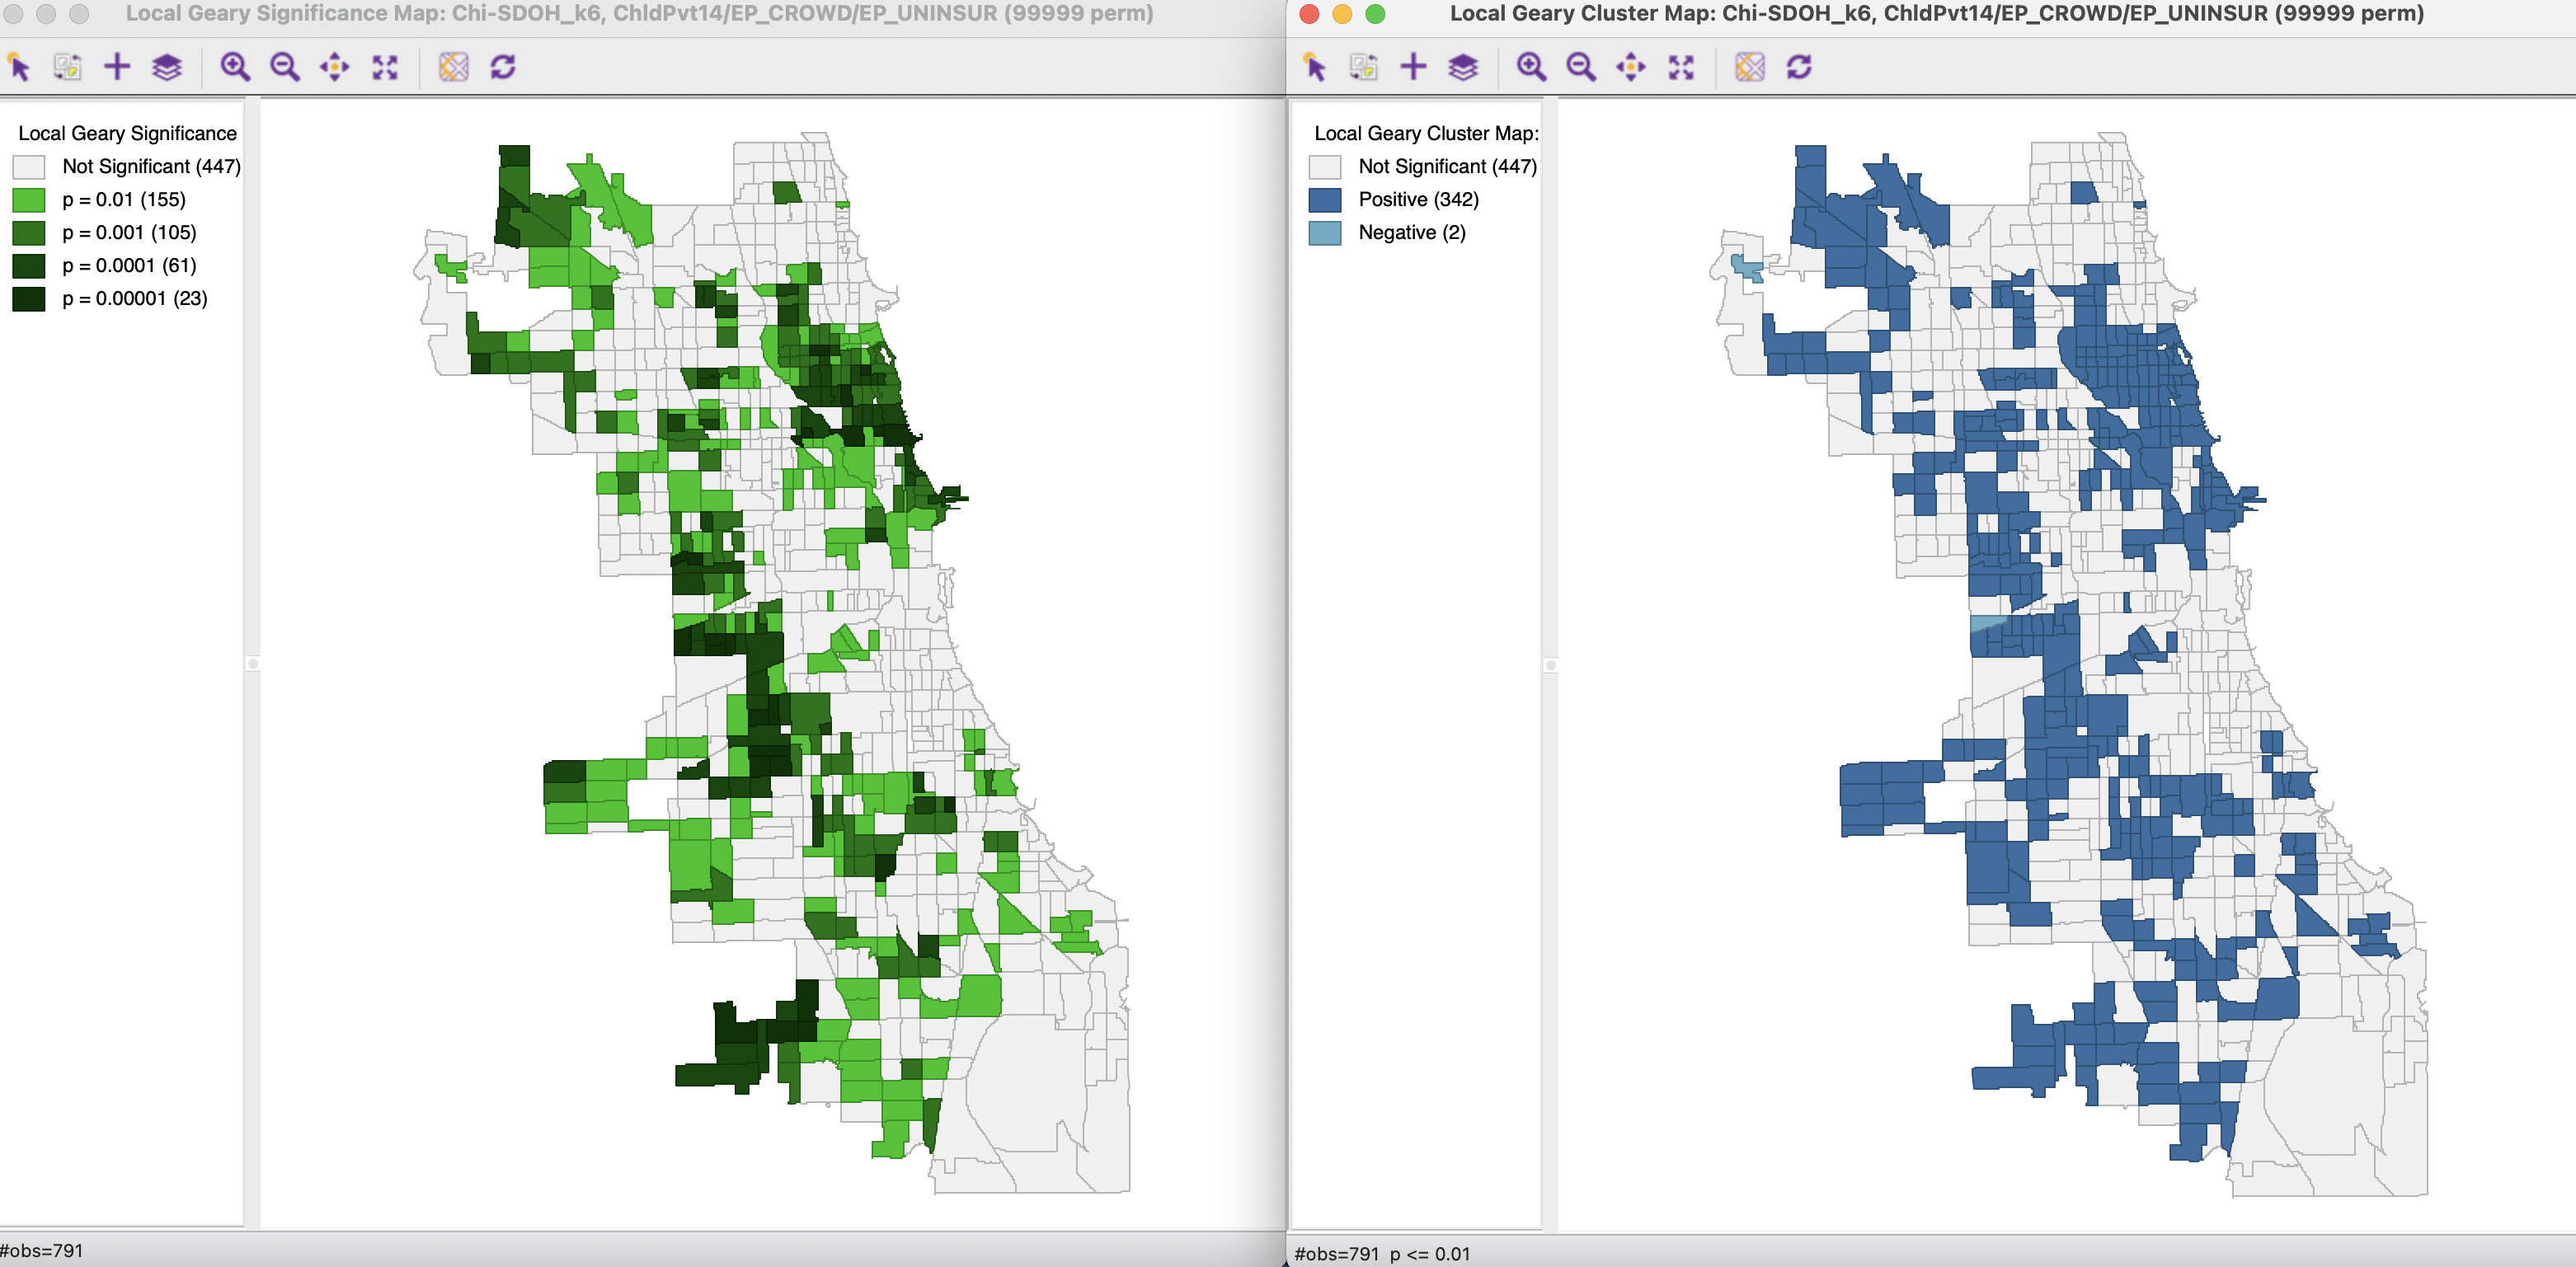 Multivariate Local Geary cluster map - Child Poverty, Crowded Housing, Uninsured